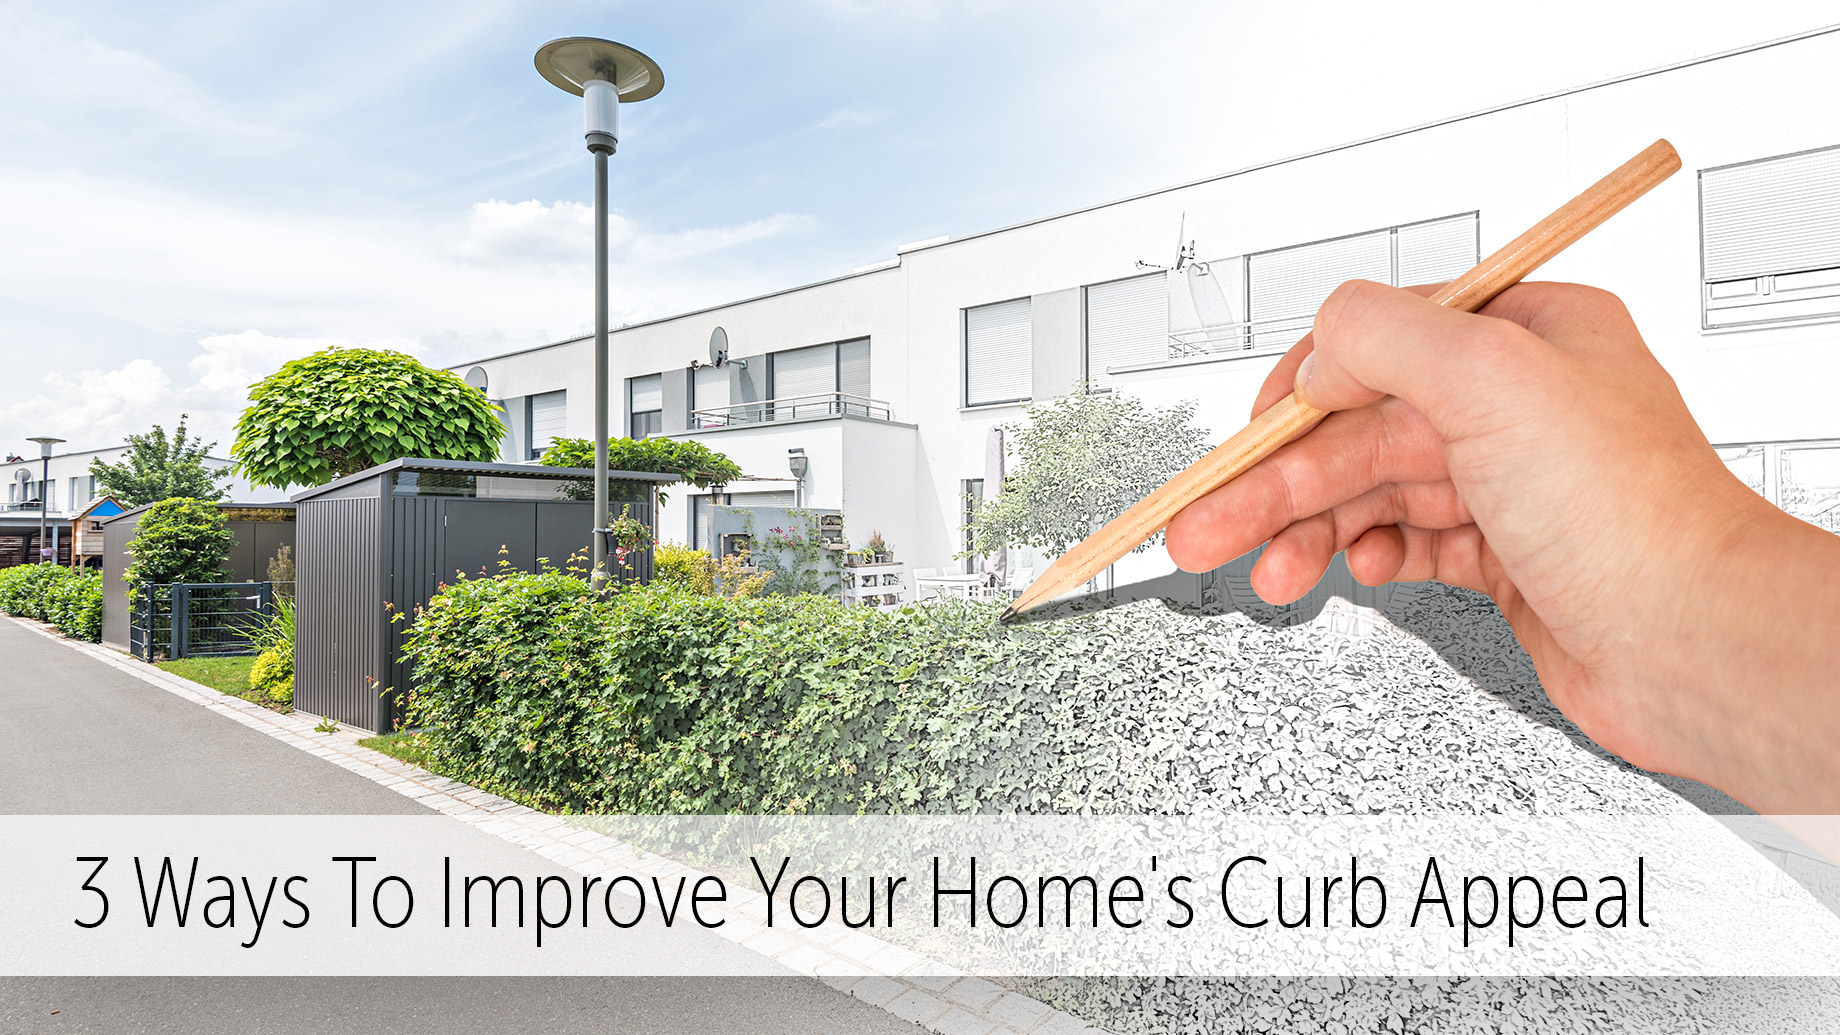 3 Ways To Improve Your Home's Curb Appeal